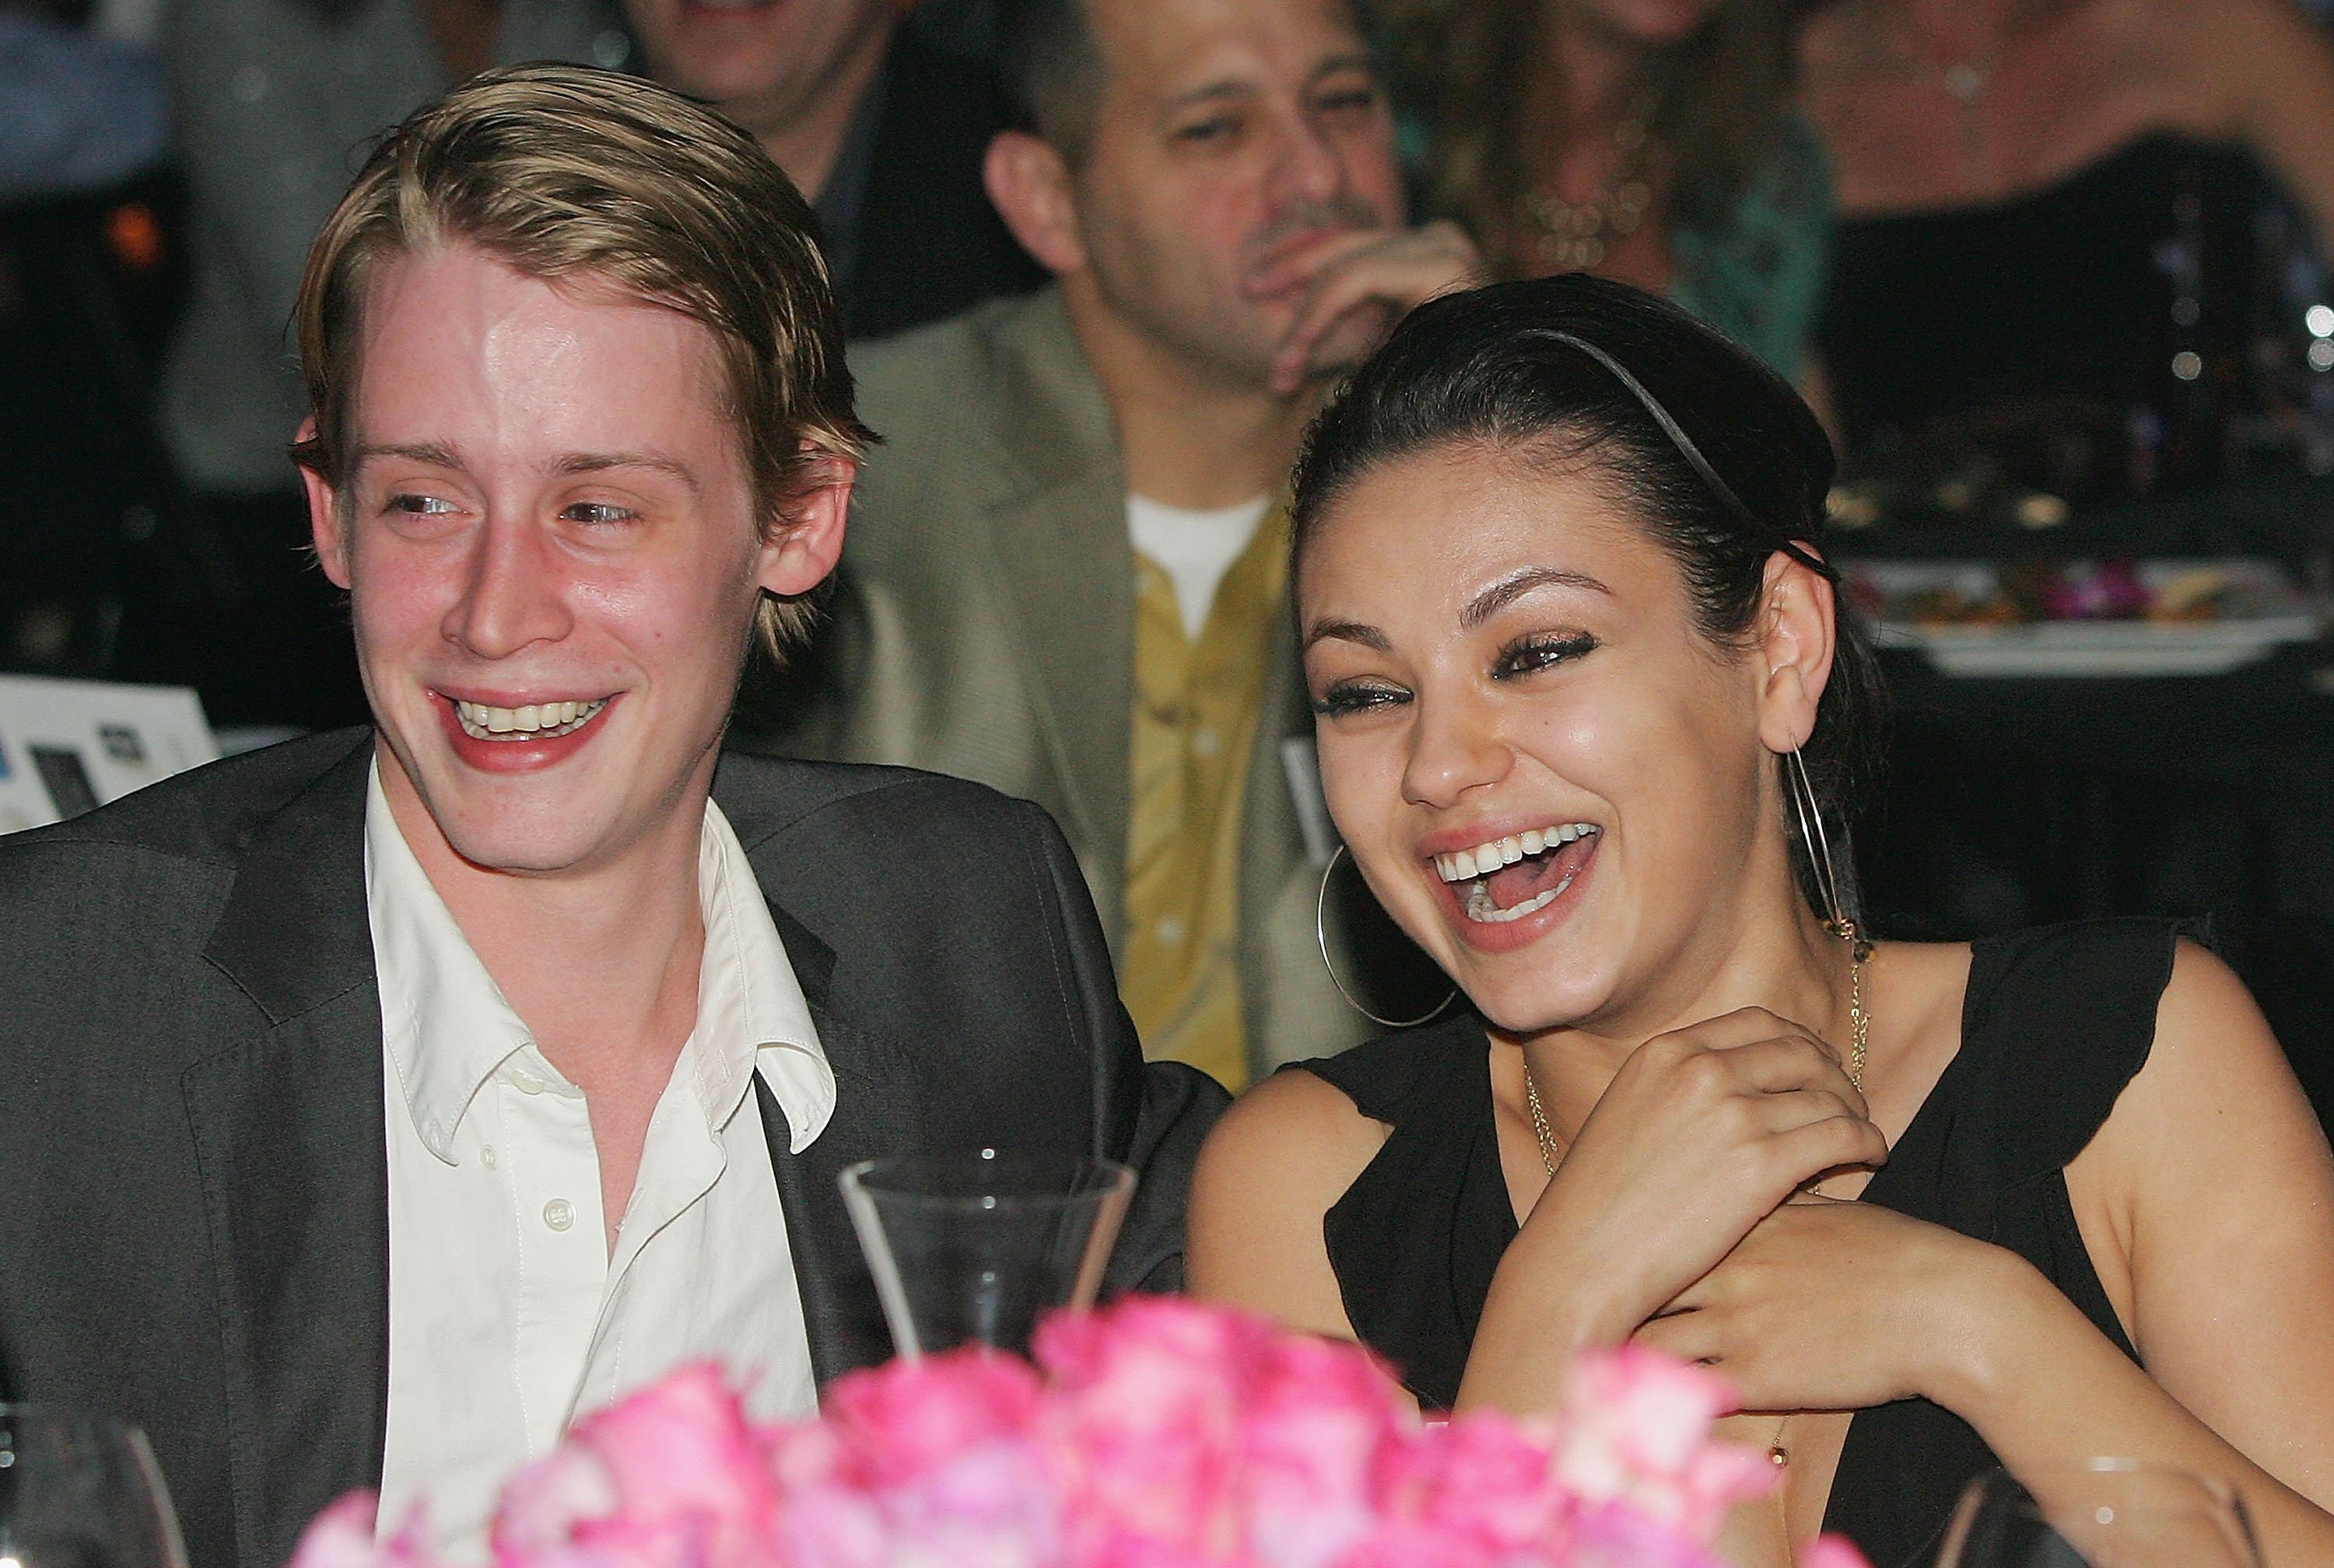 Macaulay Culkin and Mila Kunis at the launch of the "uBid for Hurricane Relief" on October 15, 2005 | Source: Getty Images